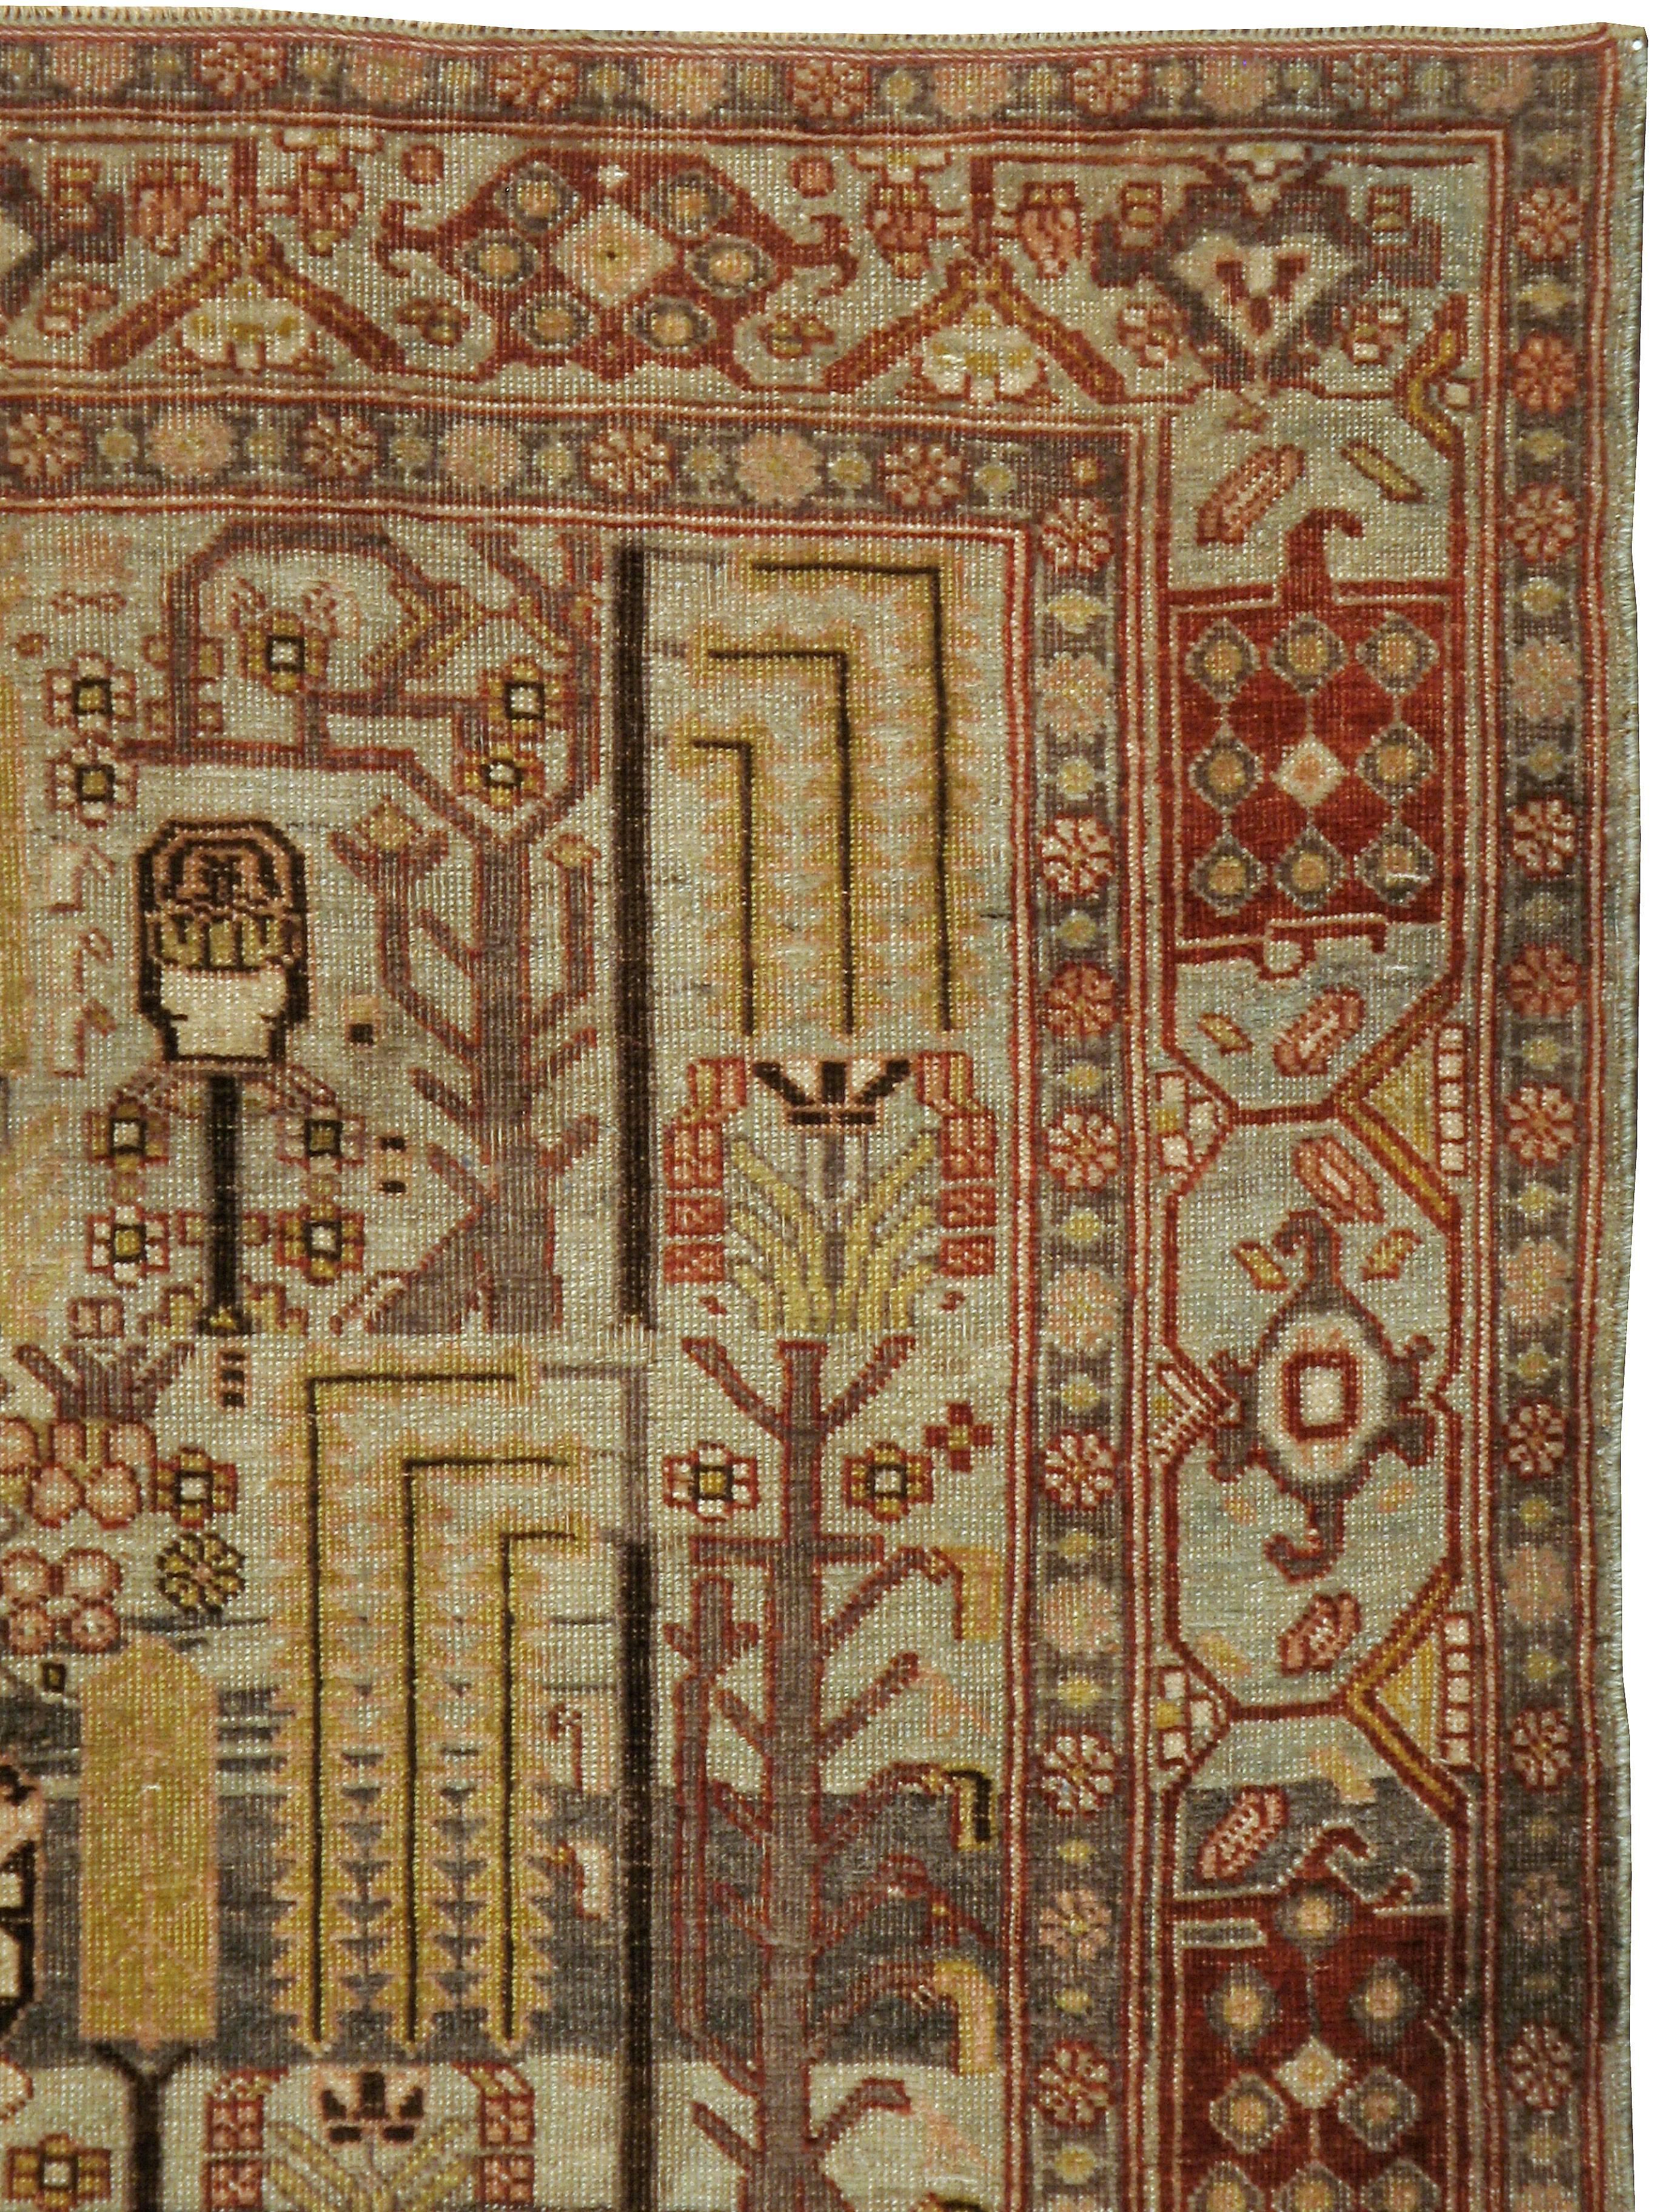 An antique washed Persian Bidjar carpet from the first quarter of the 20th century.